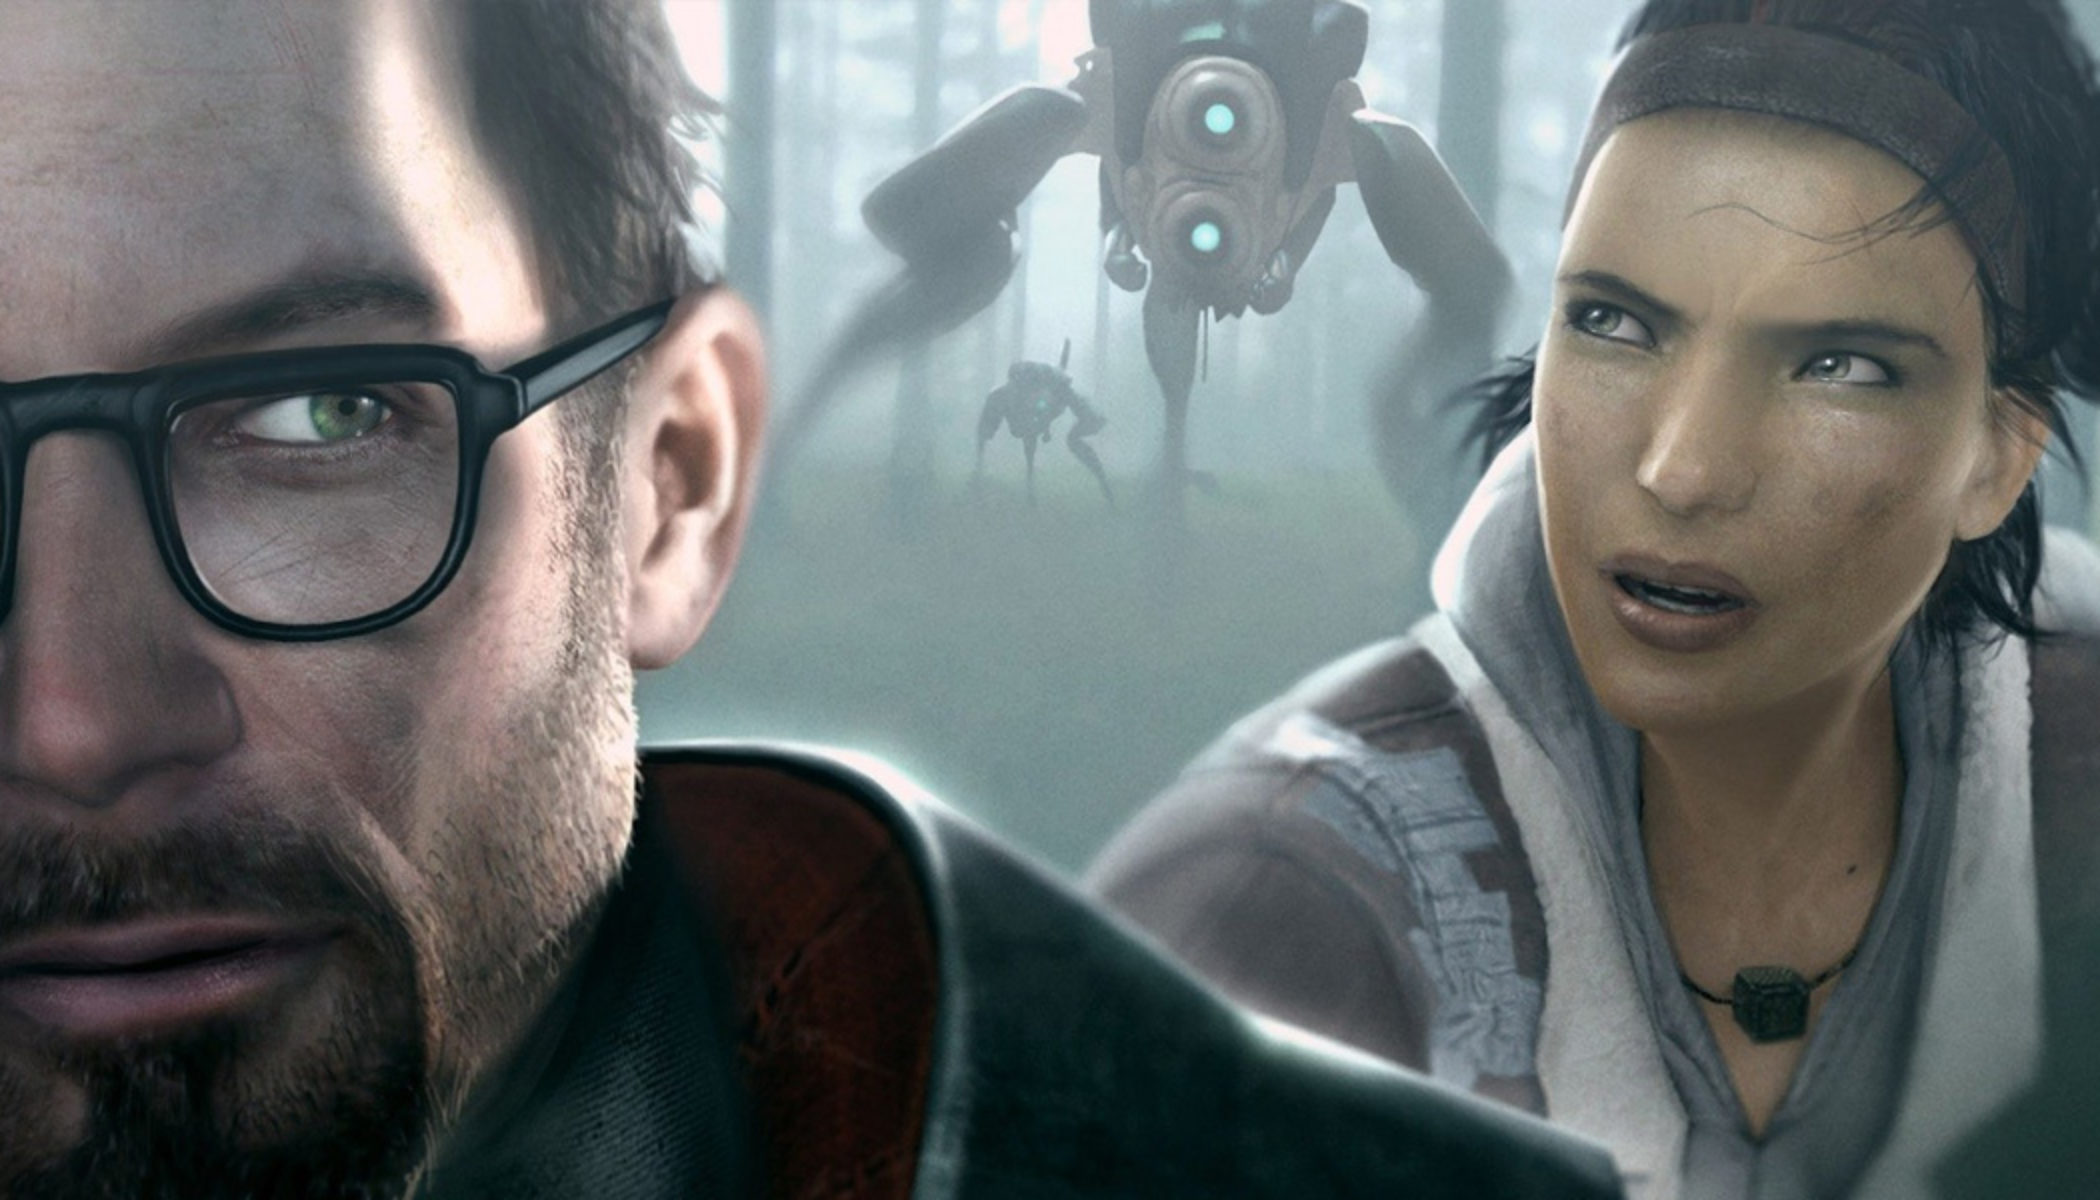 No Half-Life 3, but here's what we learned from Gabe Newell's AMA - GameSpot